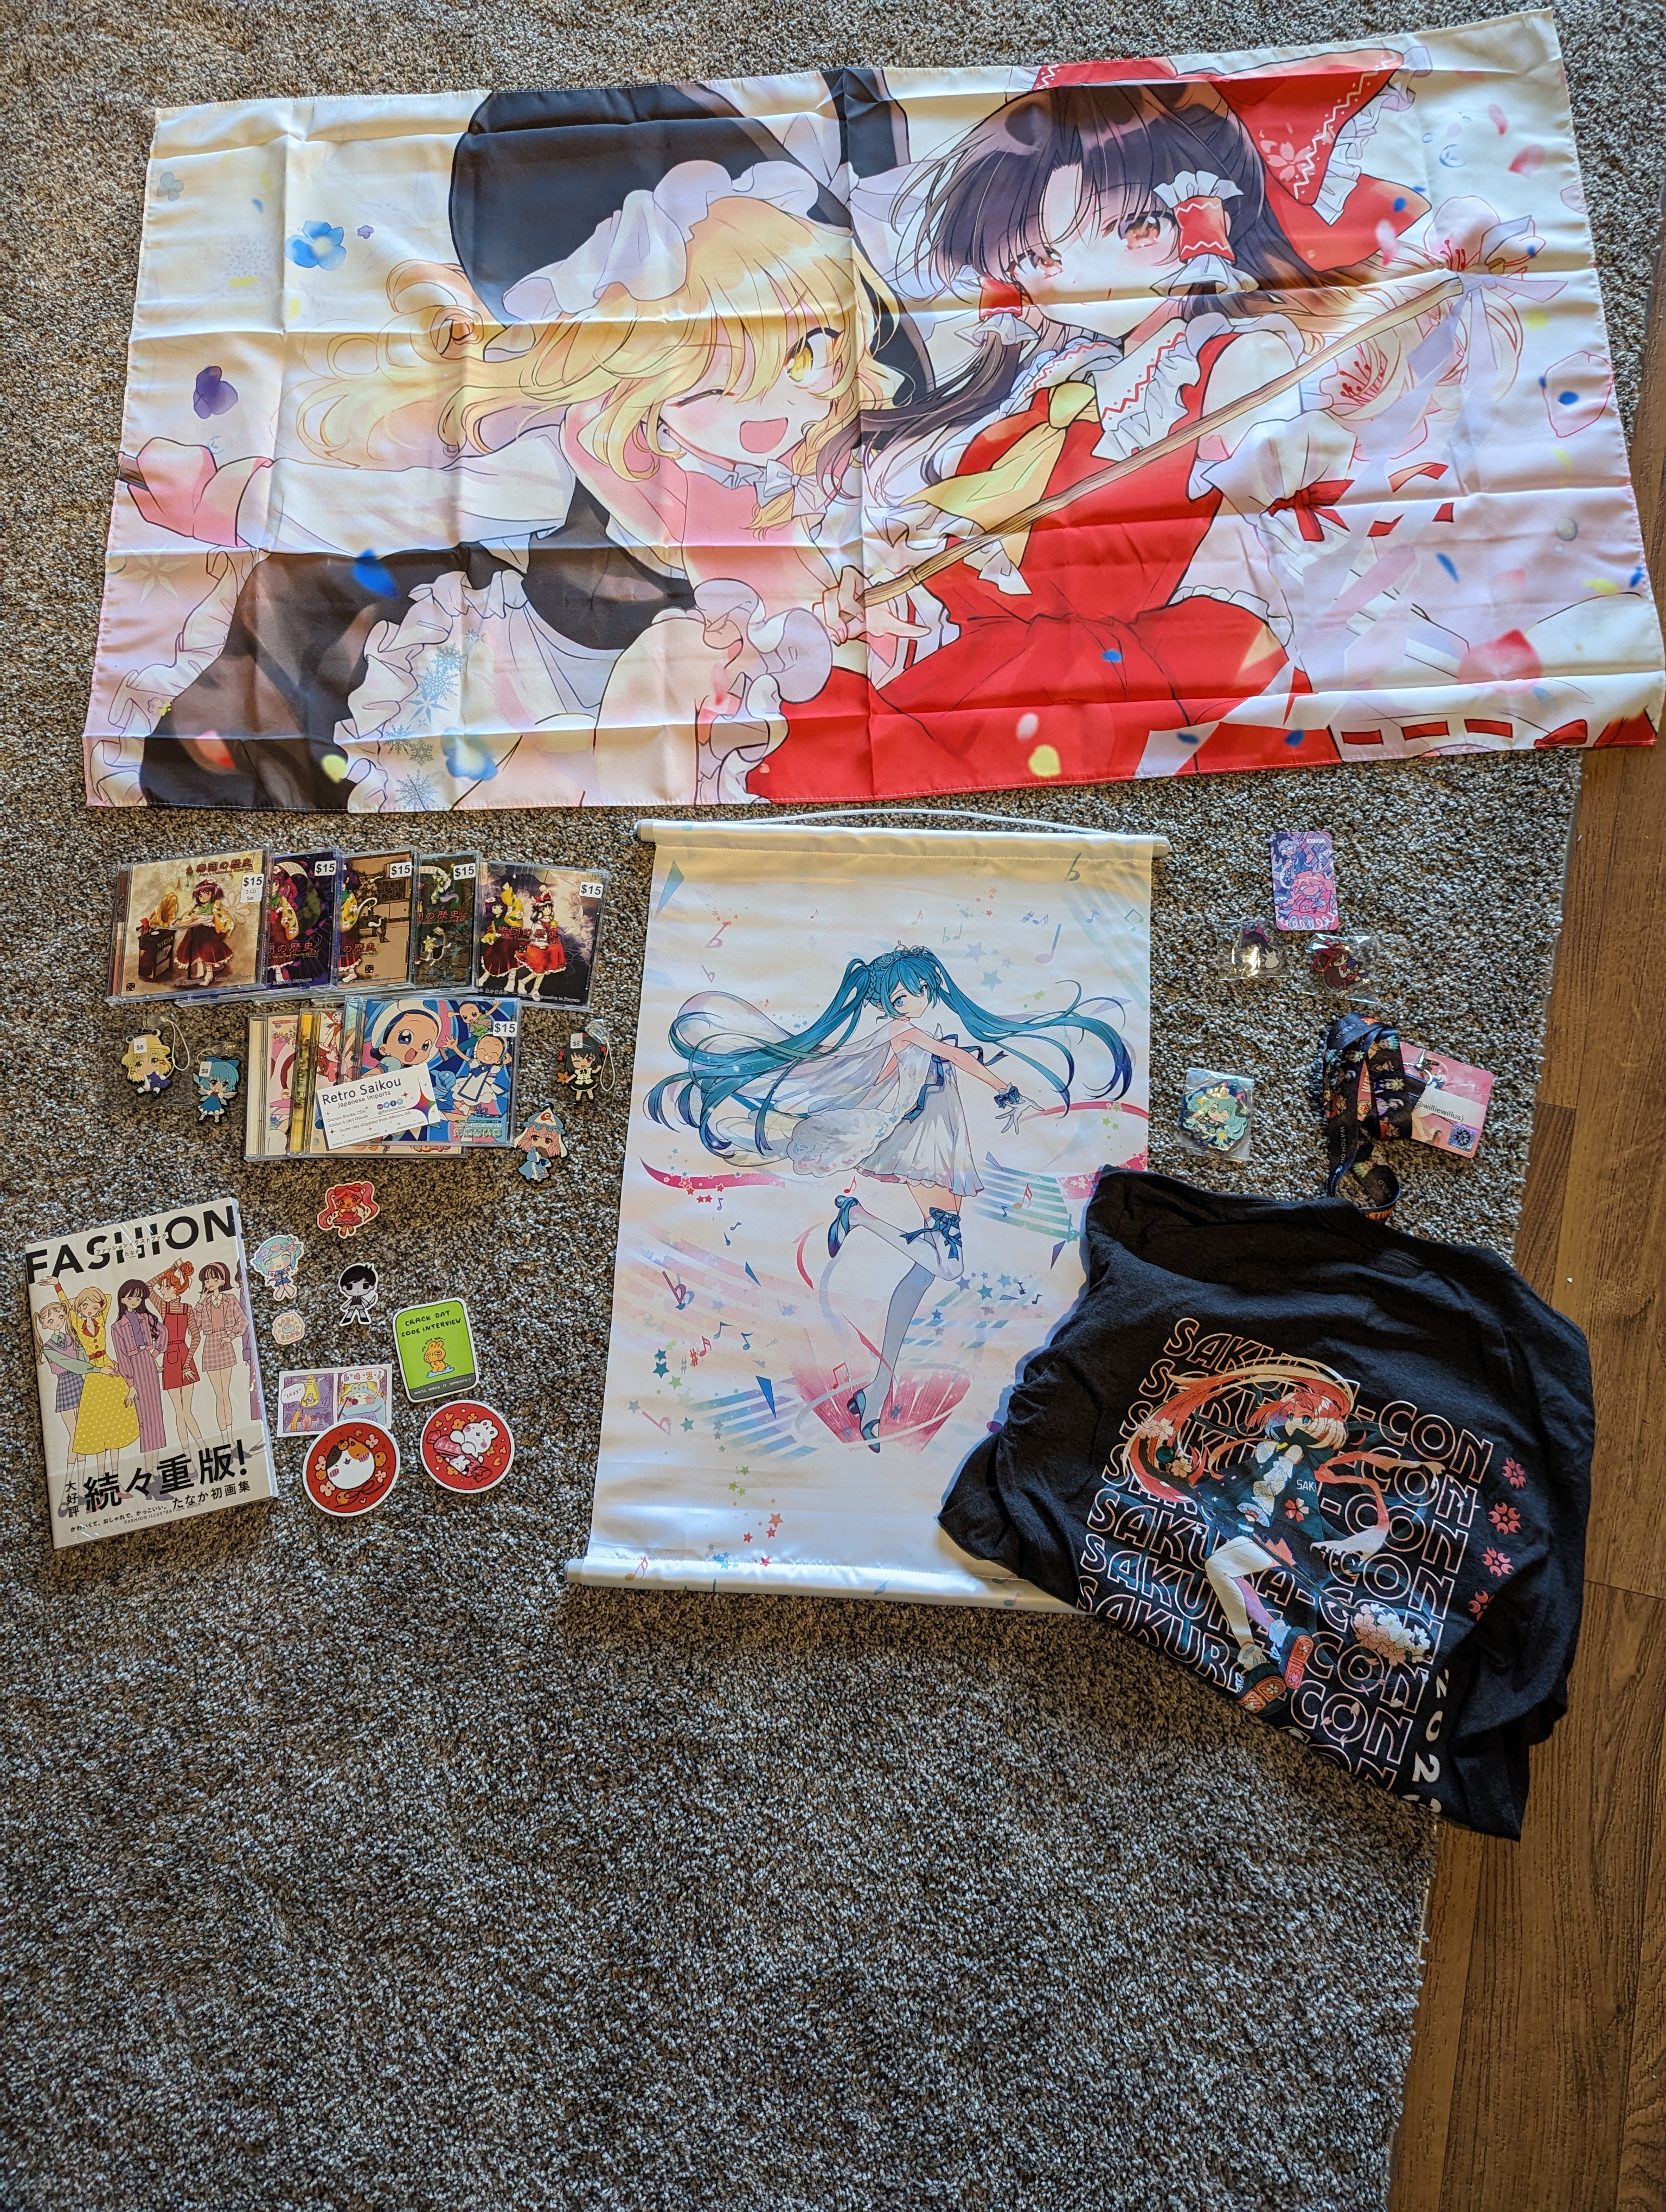 A Touhou banner, Miku wall scroll, assorted stickers and pins, 5 Touhou CD’s and 3
Ojamajo Doremi CD’s, a fashion artbook, and a Sakruacon
TShirt